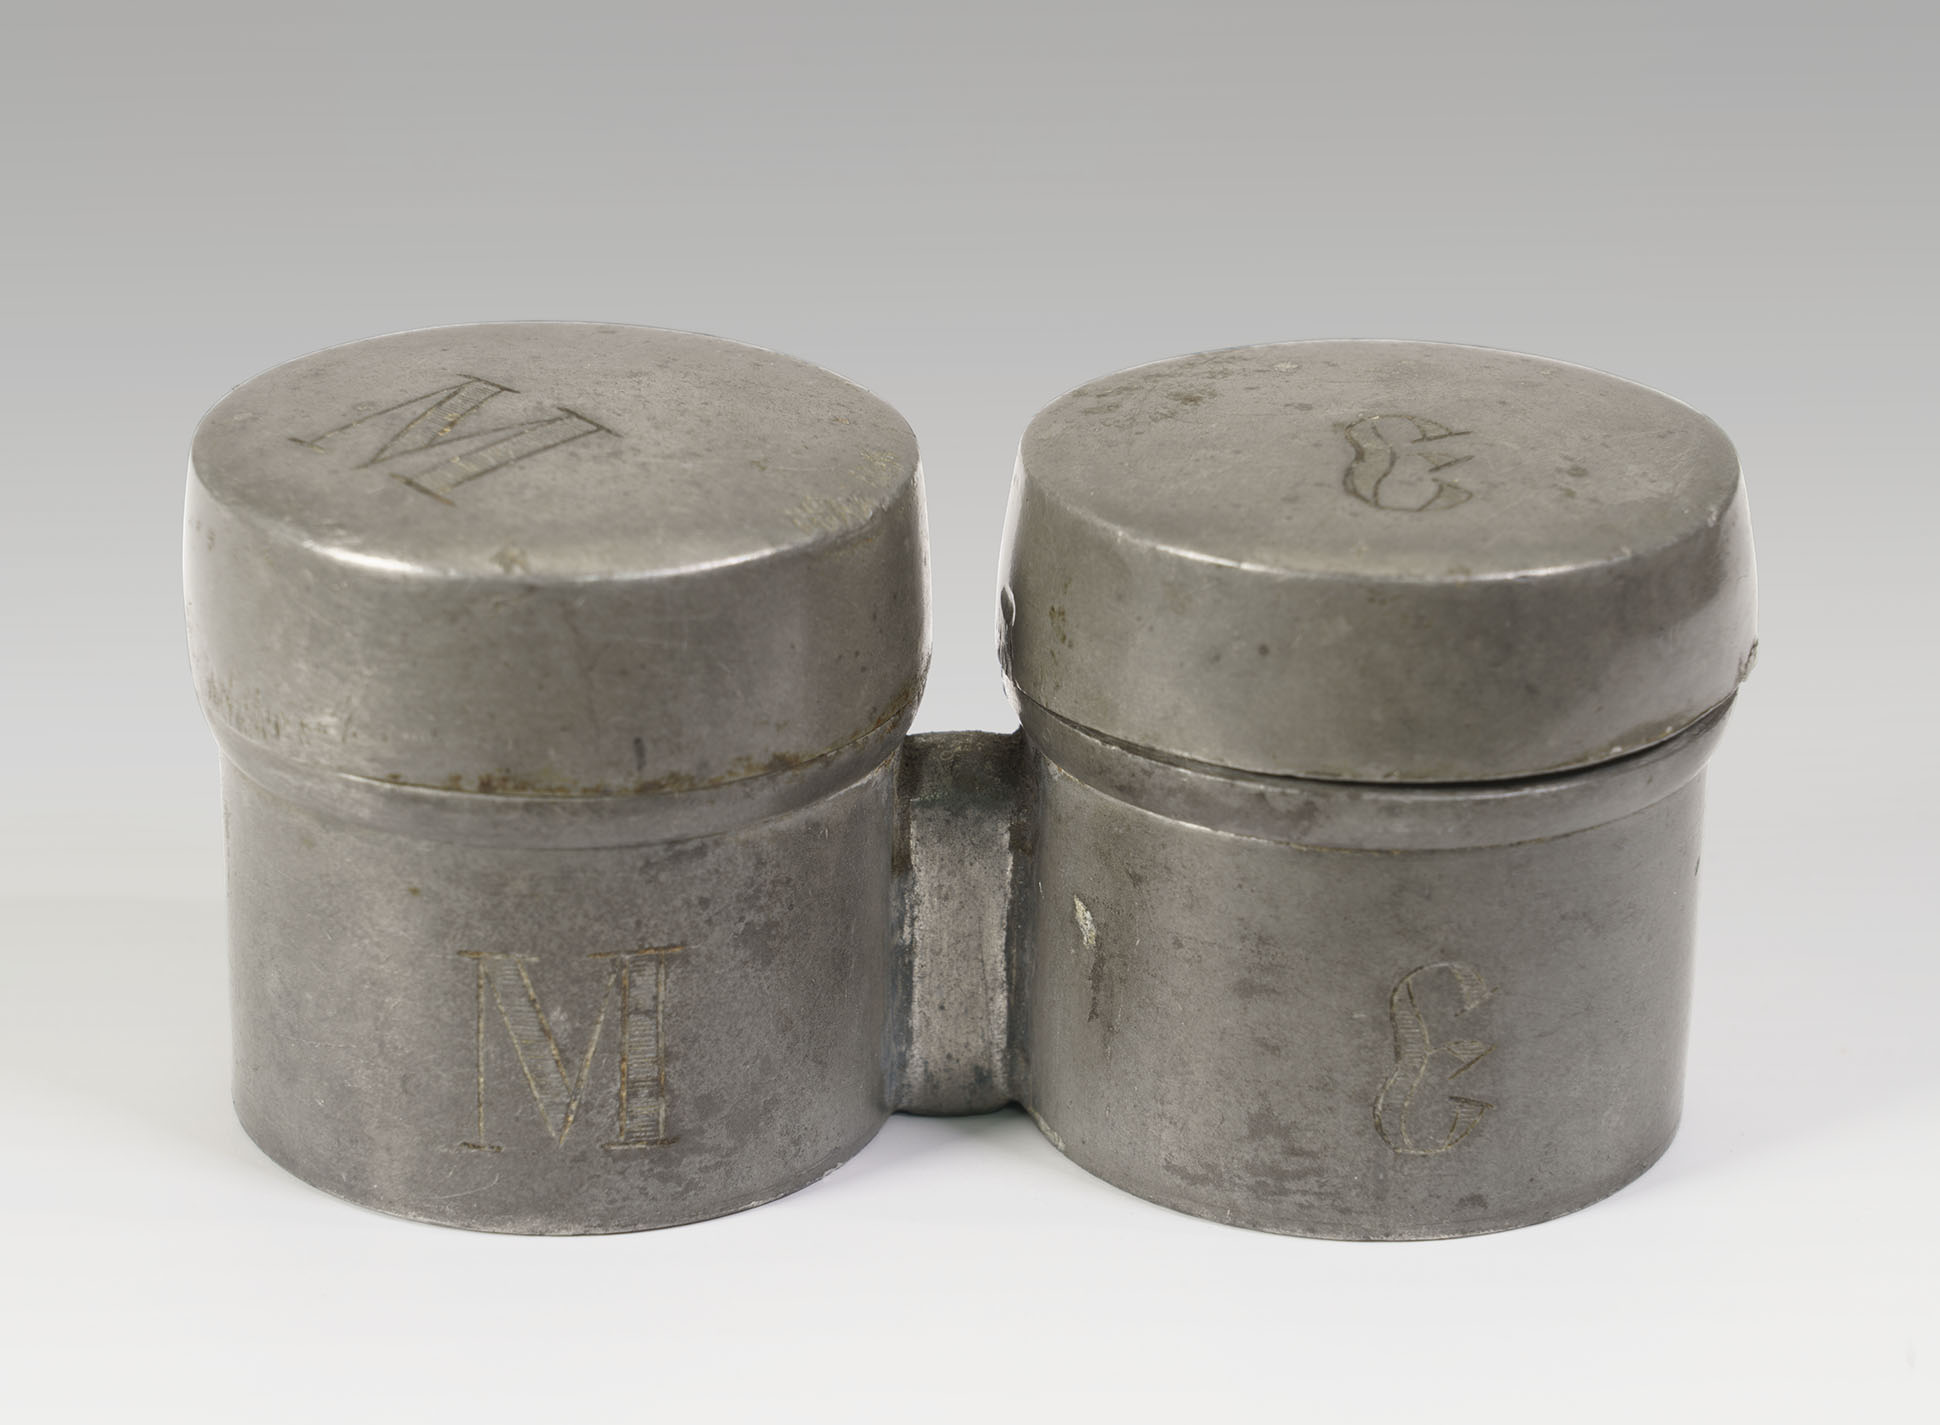 Modern photograph of two dull silver-colored round containers soldered together. Cyrillic letters are engraved on the containers and their lids.